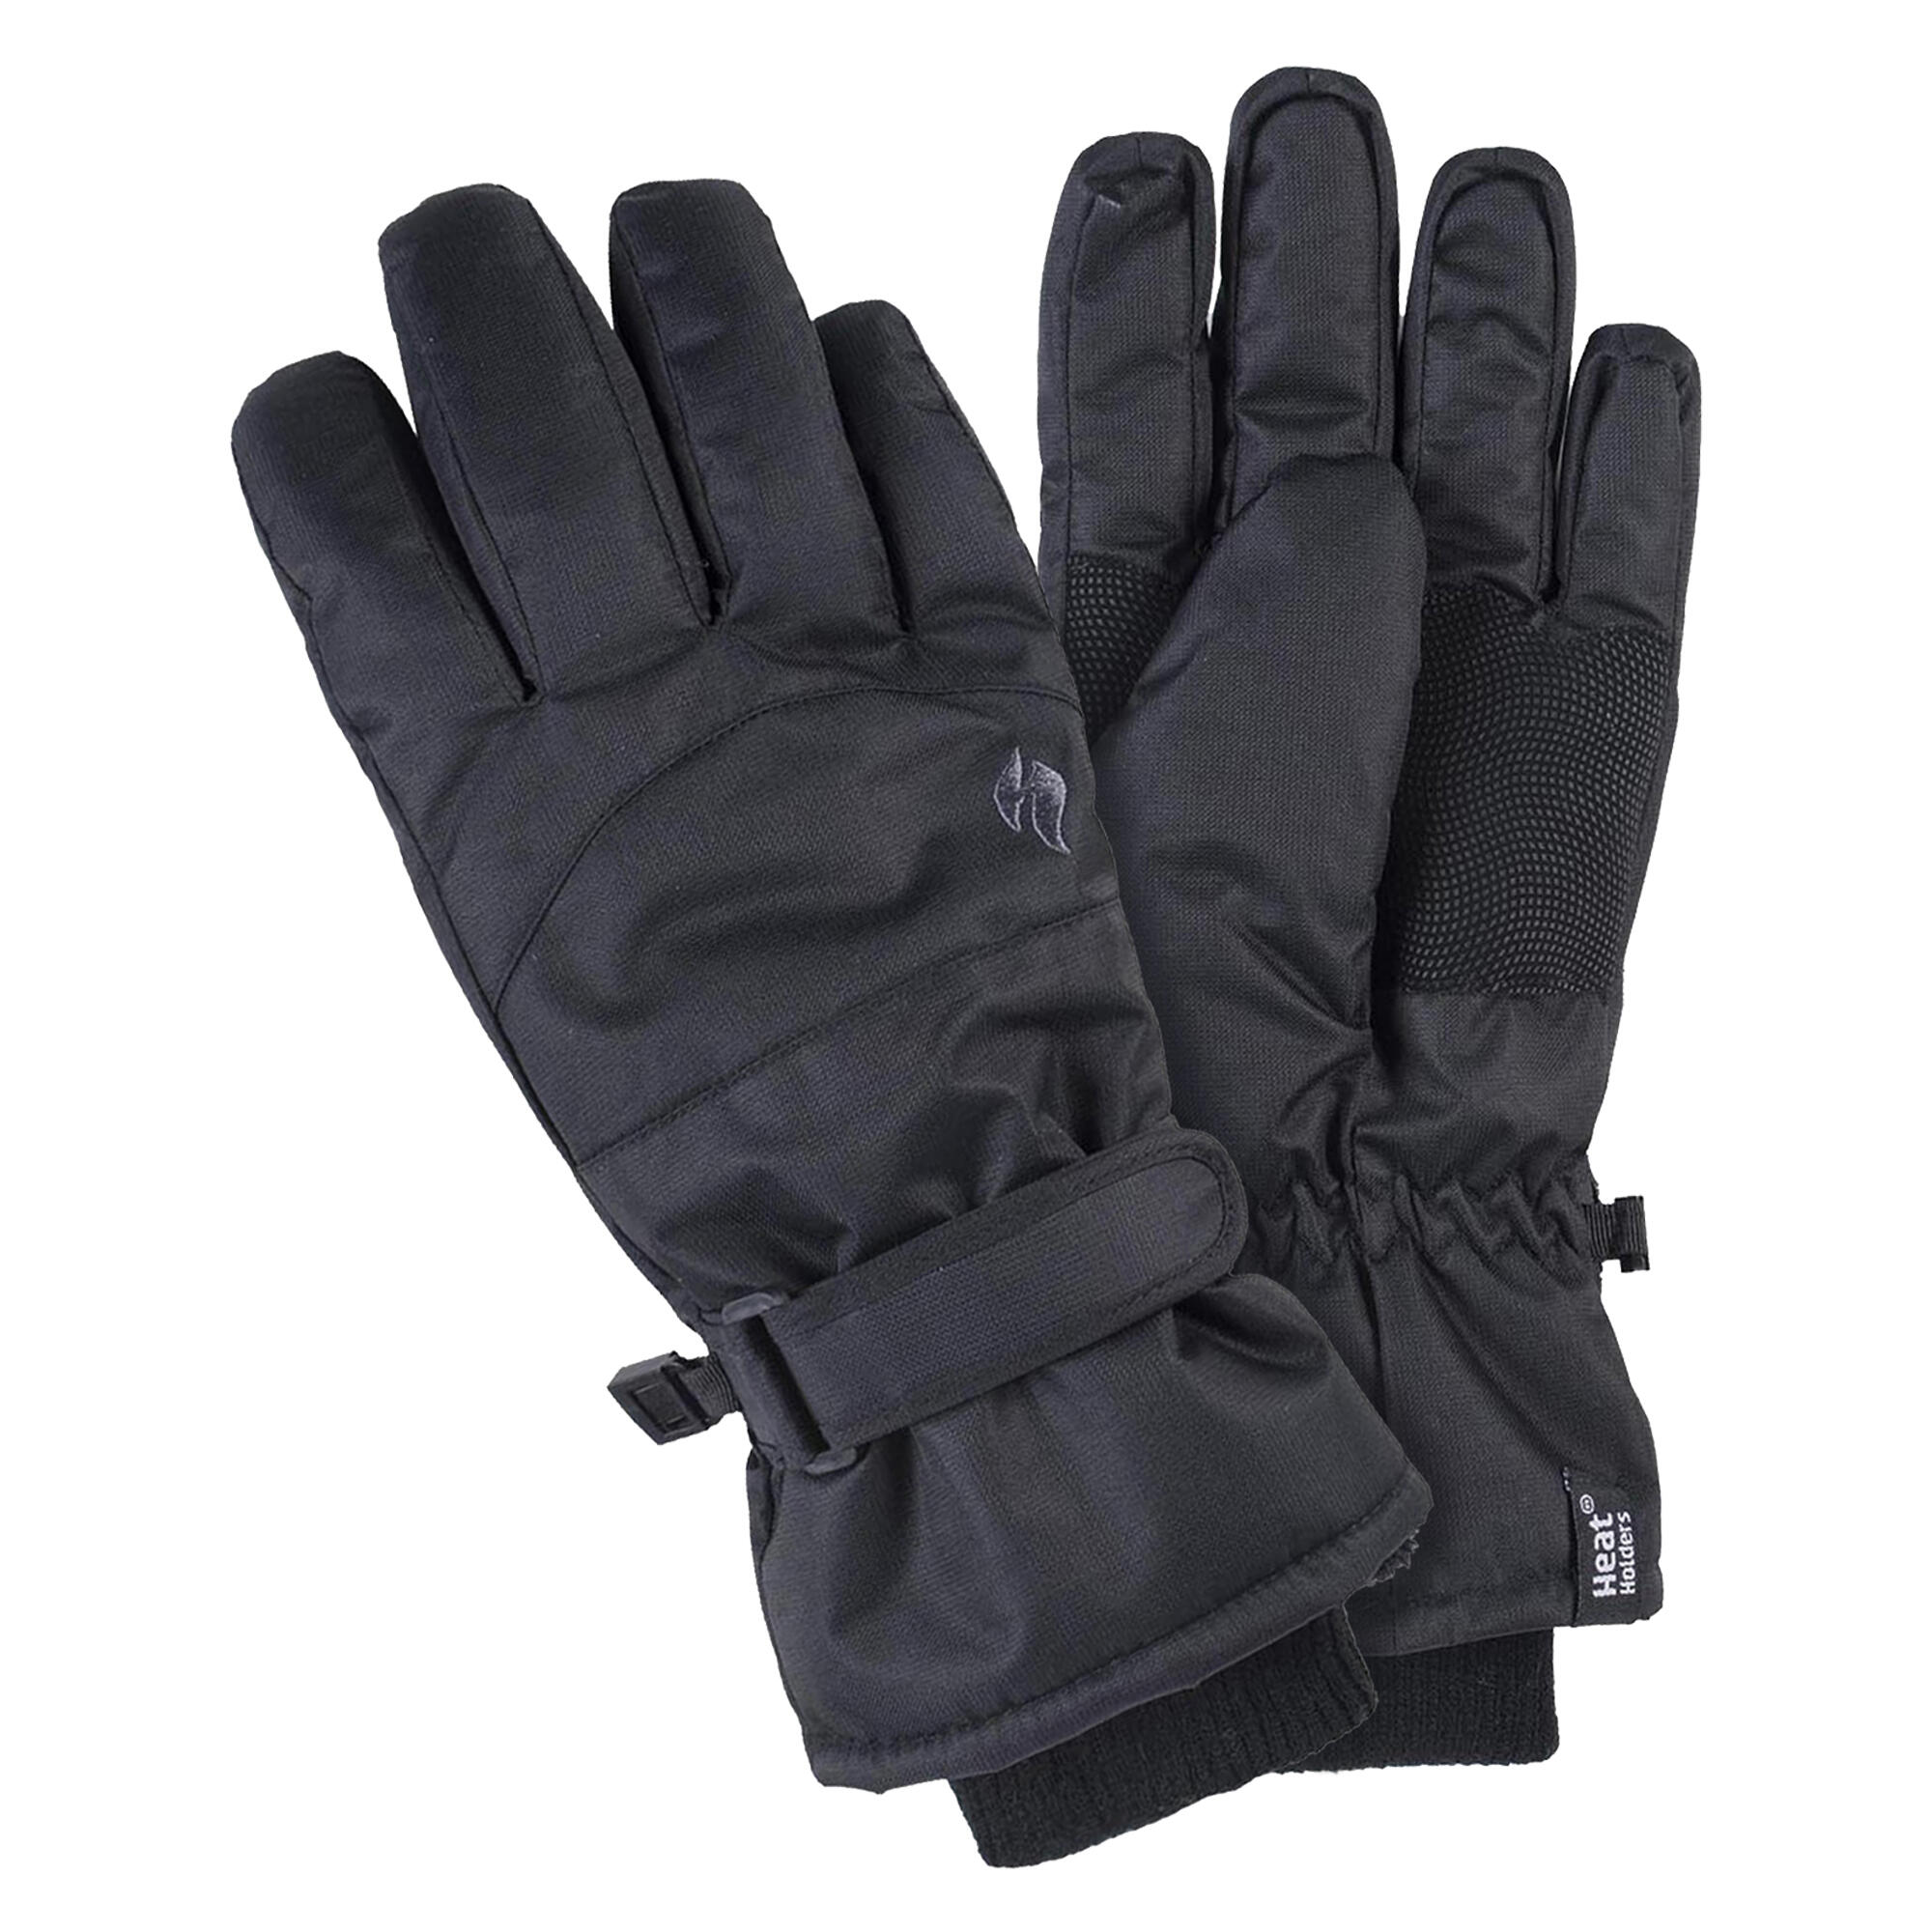 Mens Warm Padded Waterproof Insulated Thermal Ski Gloves 1/4